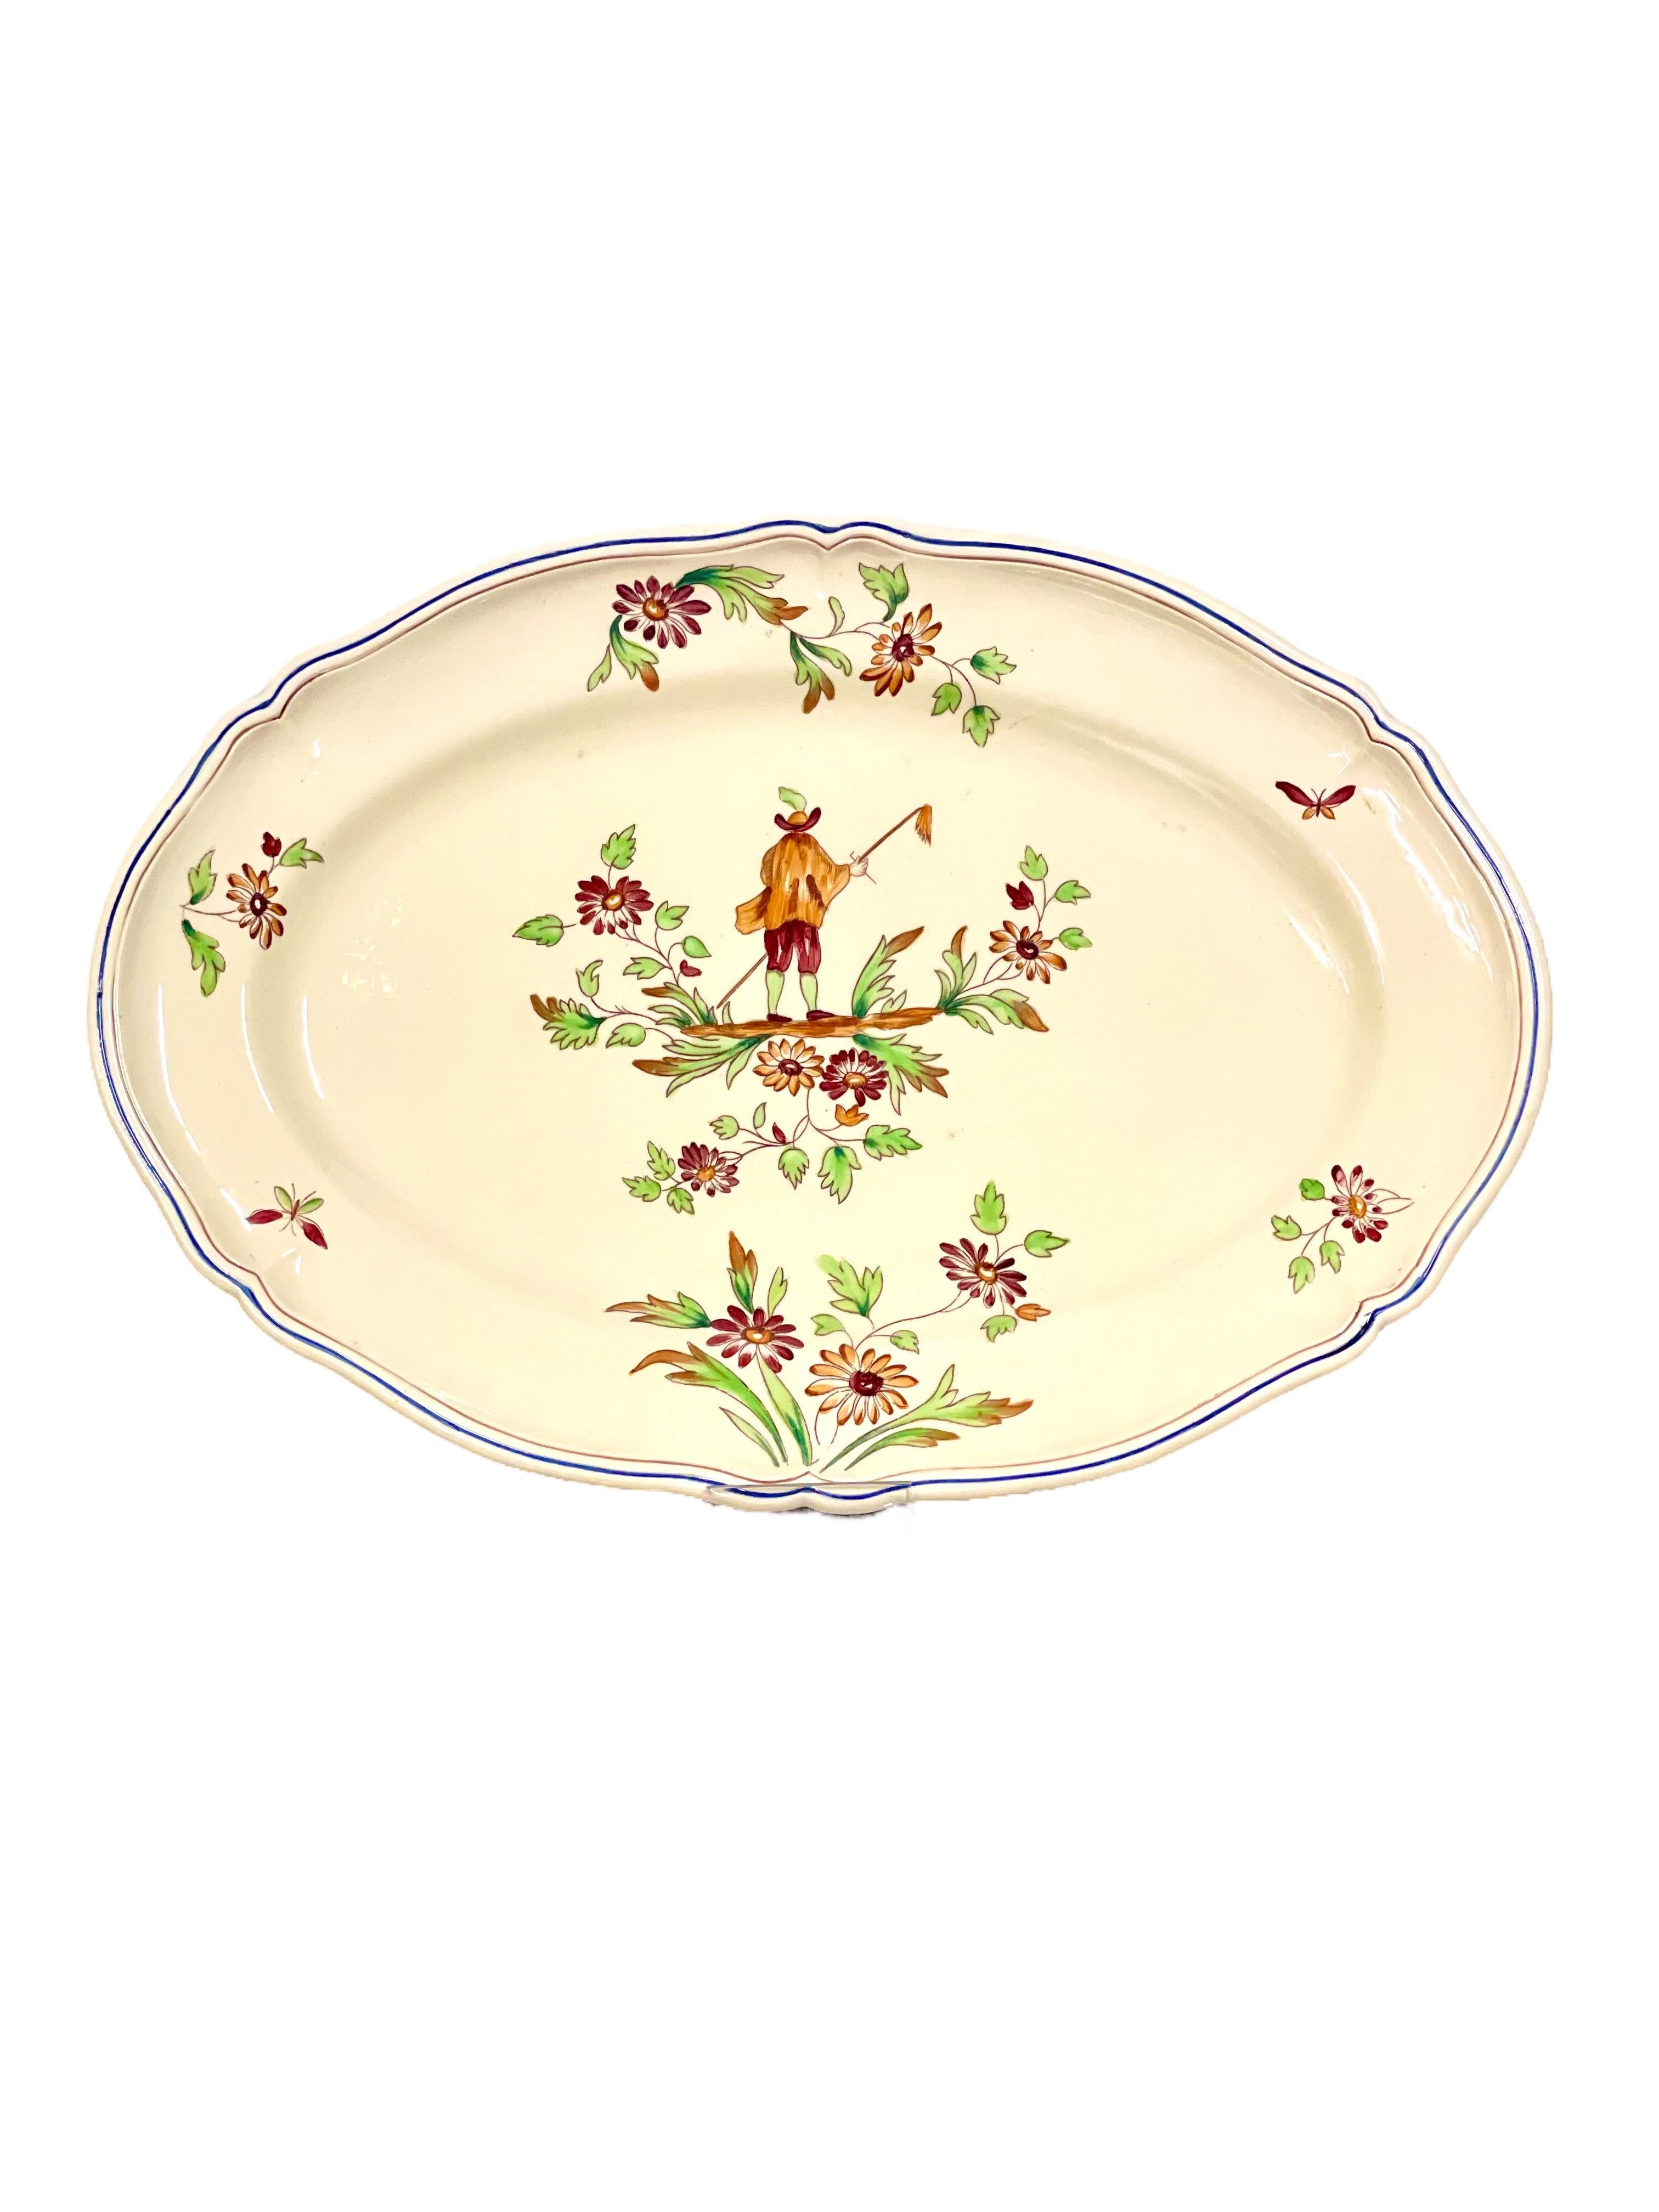 Moustiers by Longchamp French Faience Dinner Service for 12  For Sale 7